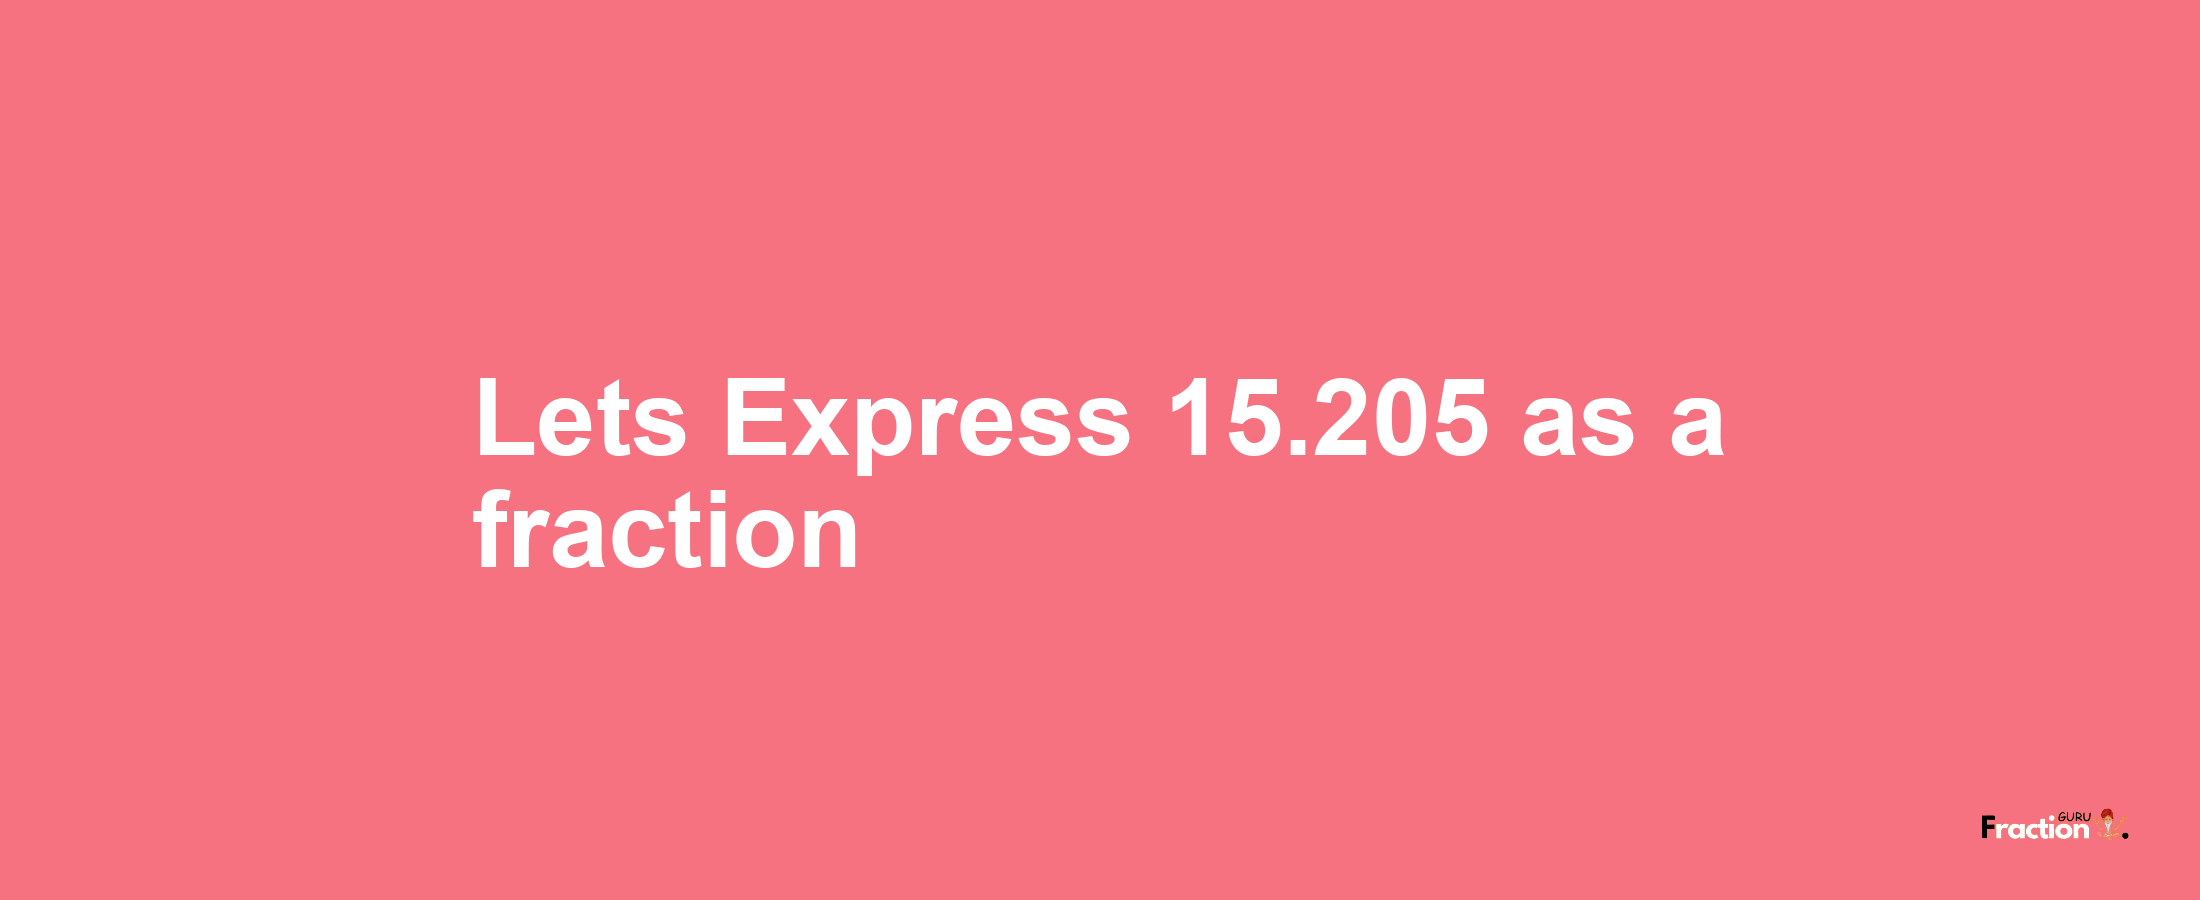 Lets Express 15.205 as afraction